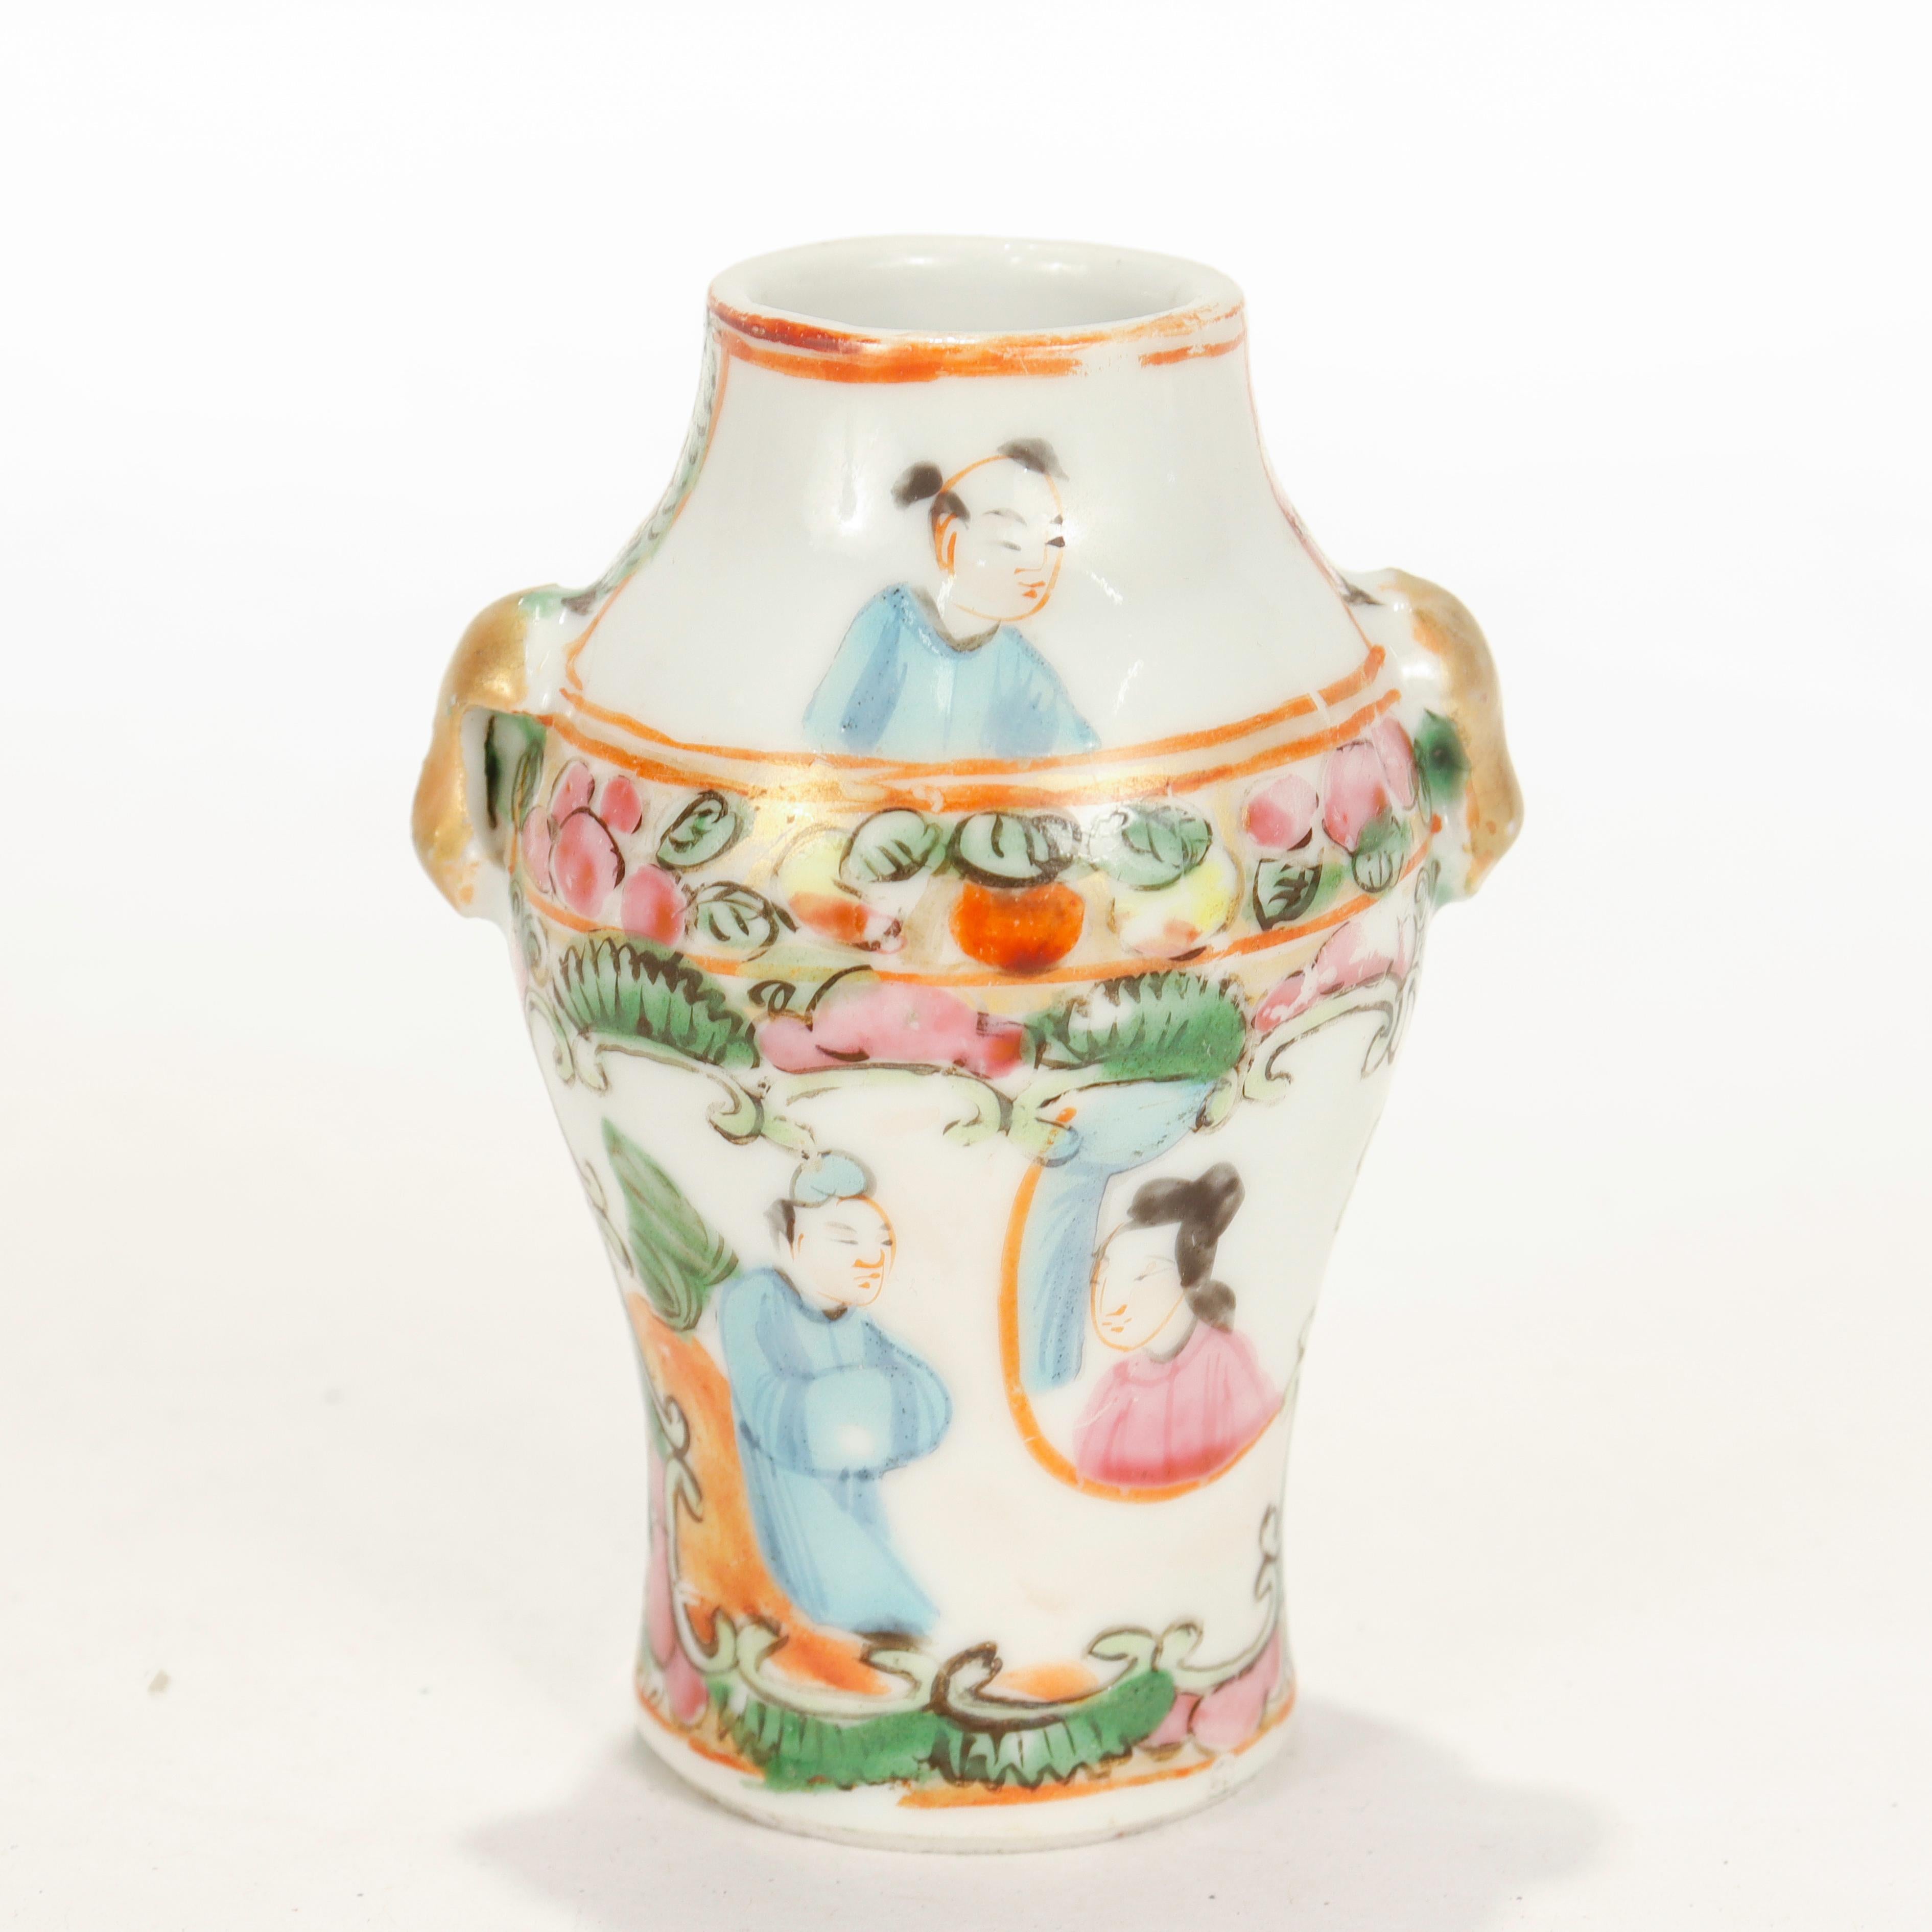 An antique Chinese porcelain vase.

In the Rose Medallion style.

With two small gilt handles.

Simply a wonderful Chinese Export Rose Medallion porcelain vase!

Date:
Late 19th or Early 20th Century

Overall Condition:
It is in overall